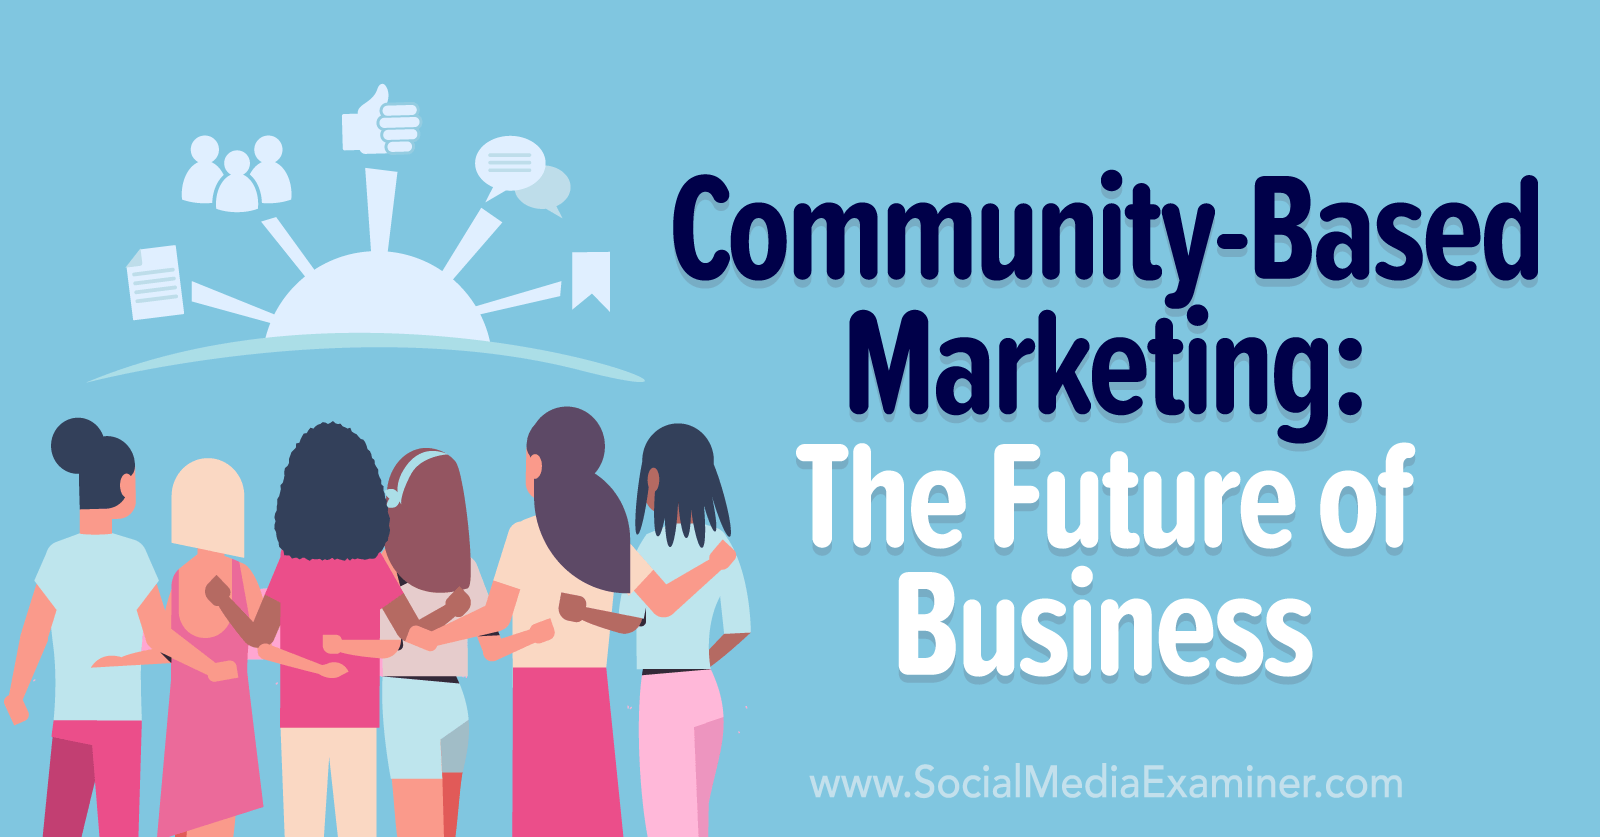 Community-Based Marketing: The Future of Business by Social Media Examiner